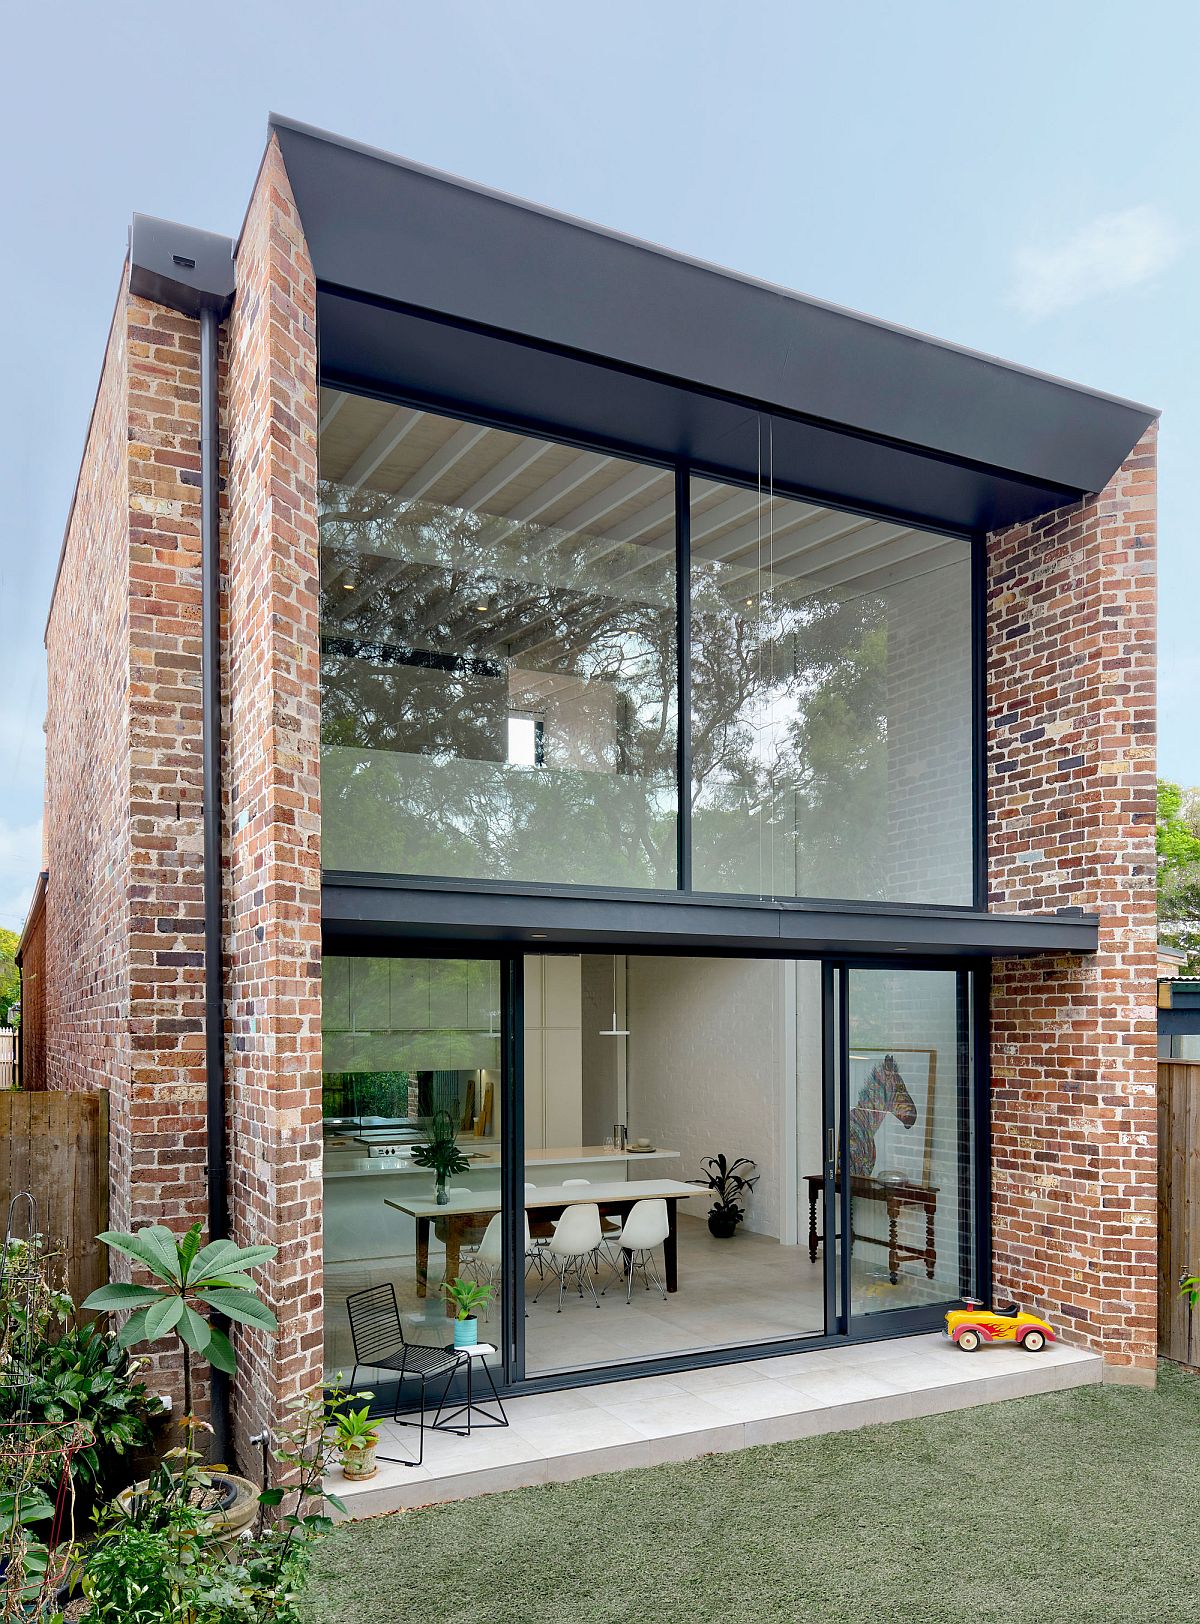 Think-beyond-the-simple-single-level-rear-extension-for-your-heritage-home-18411